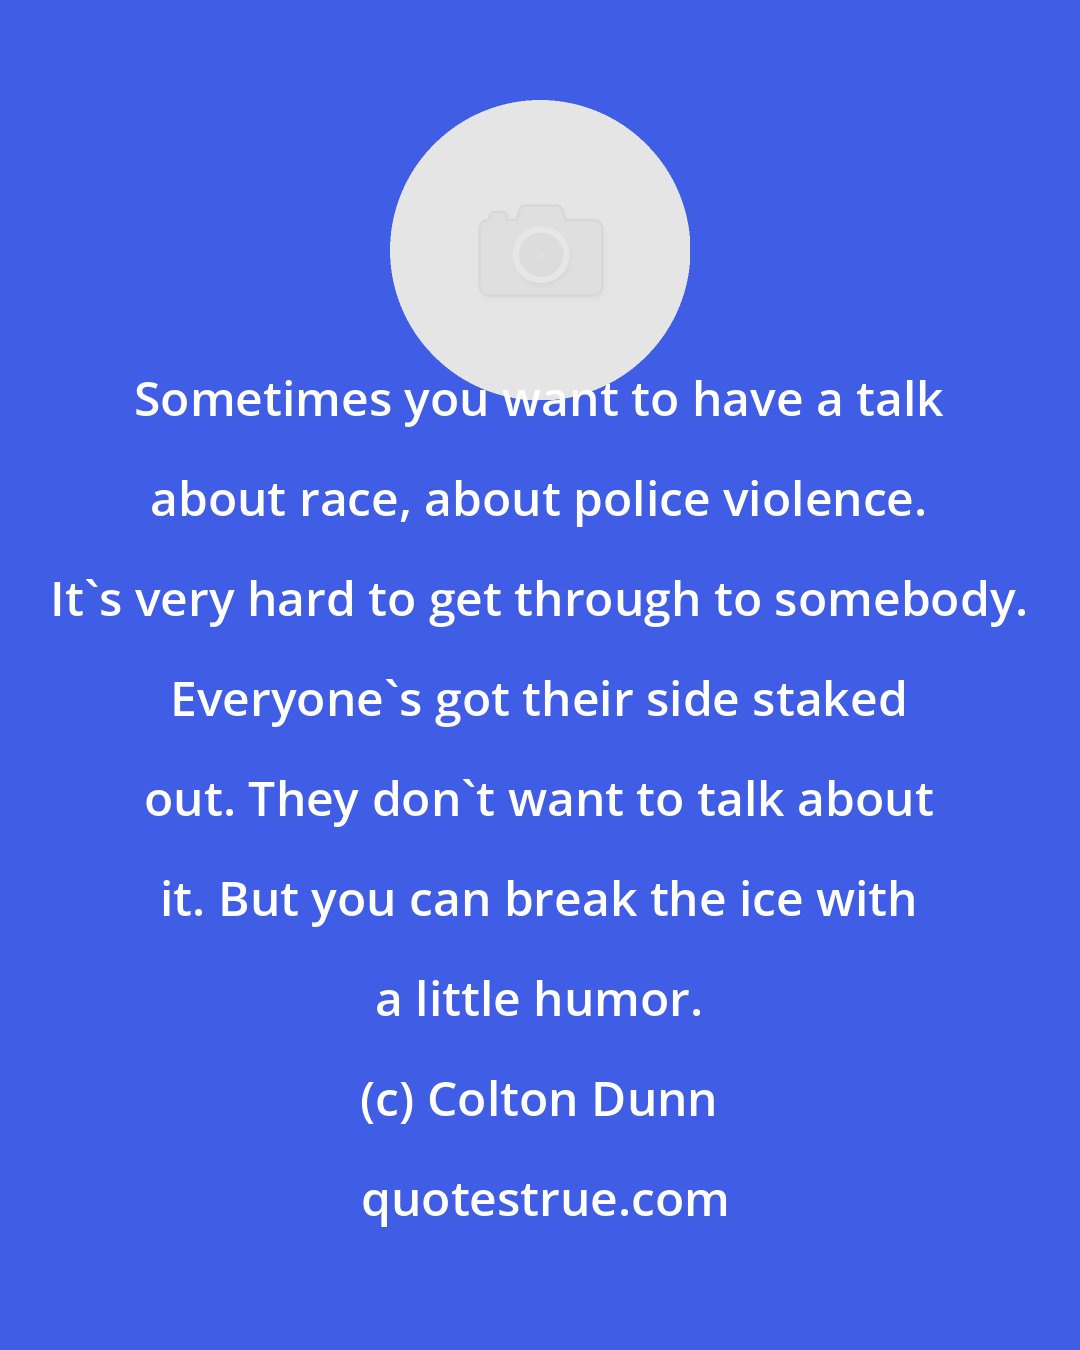 Colton Dunn: Sometimes you want to have a talk about race, about police violence. It's very hard to get through to somebody. Everyone's got their side staked out. They don't want to talk about it. But you can break the ice with a little humor.